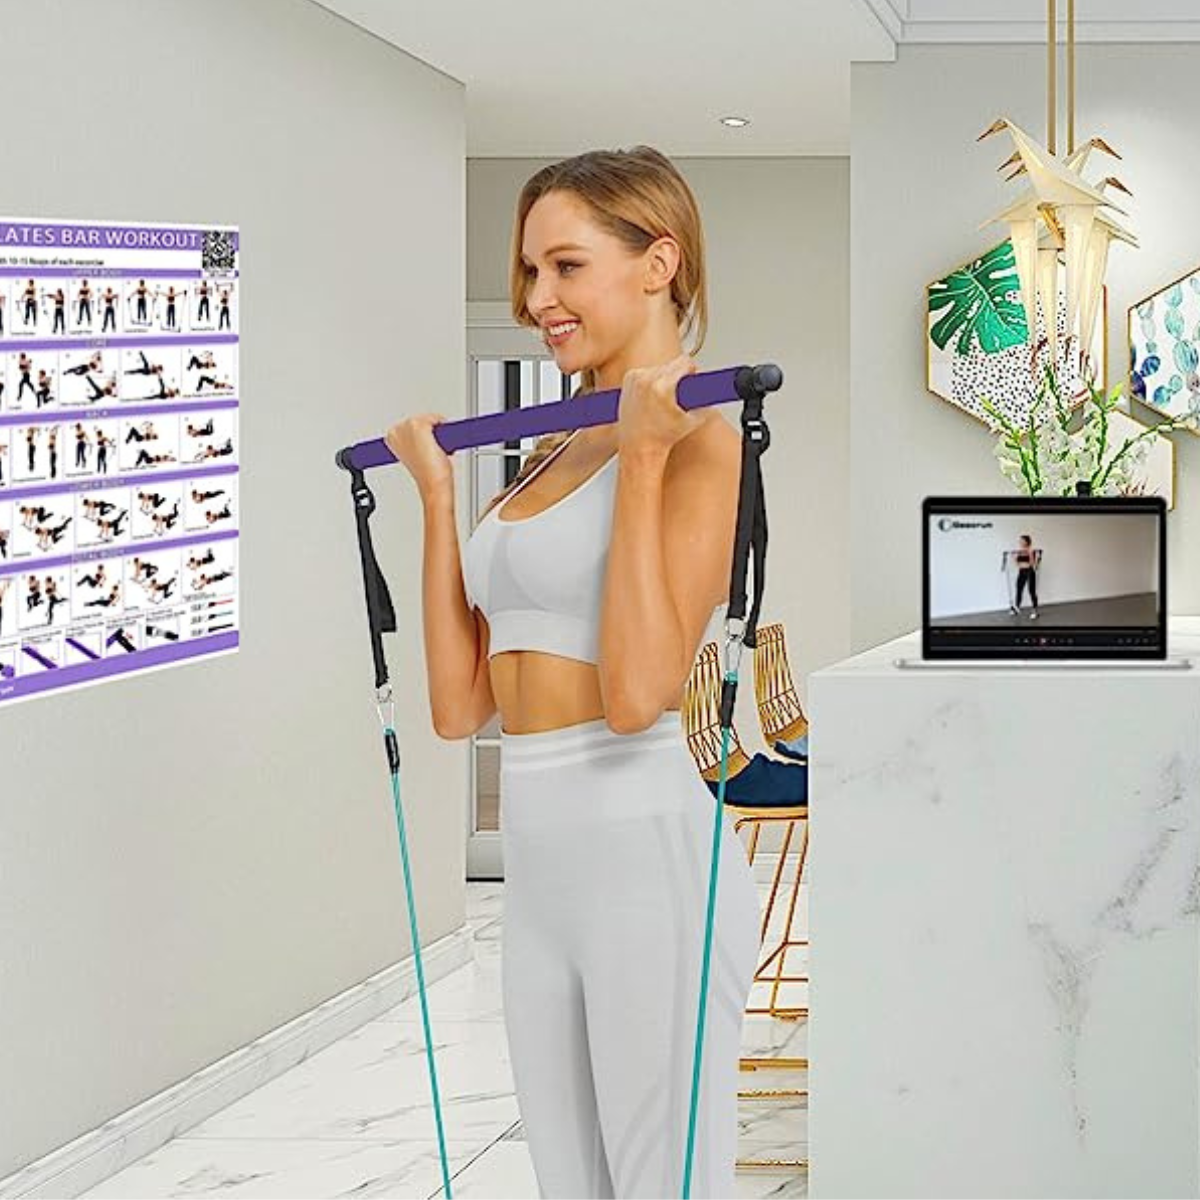 35 Amazon Products For Epic At-Home Workouts